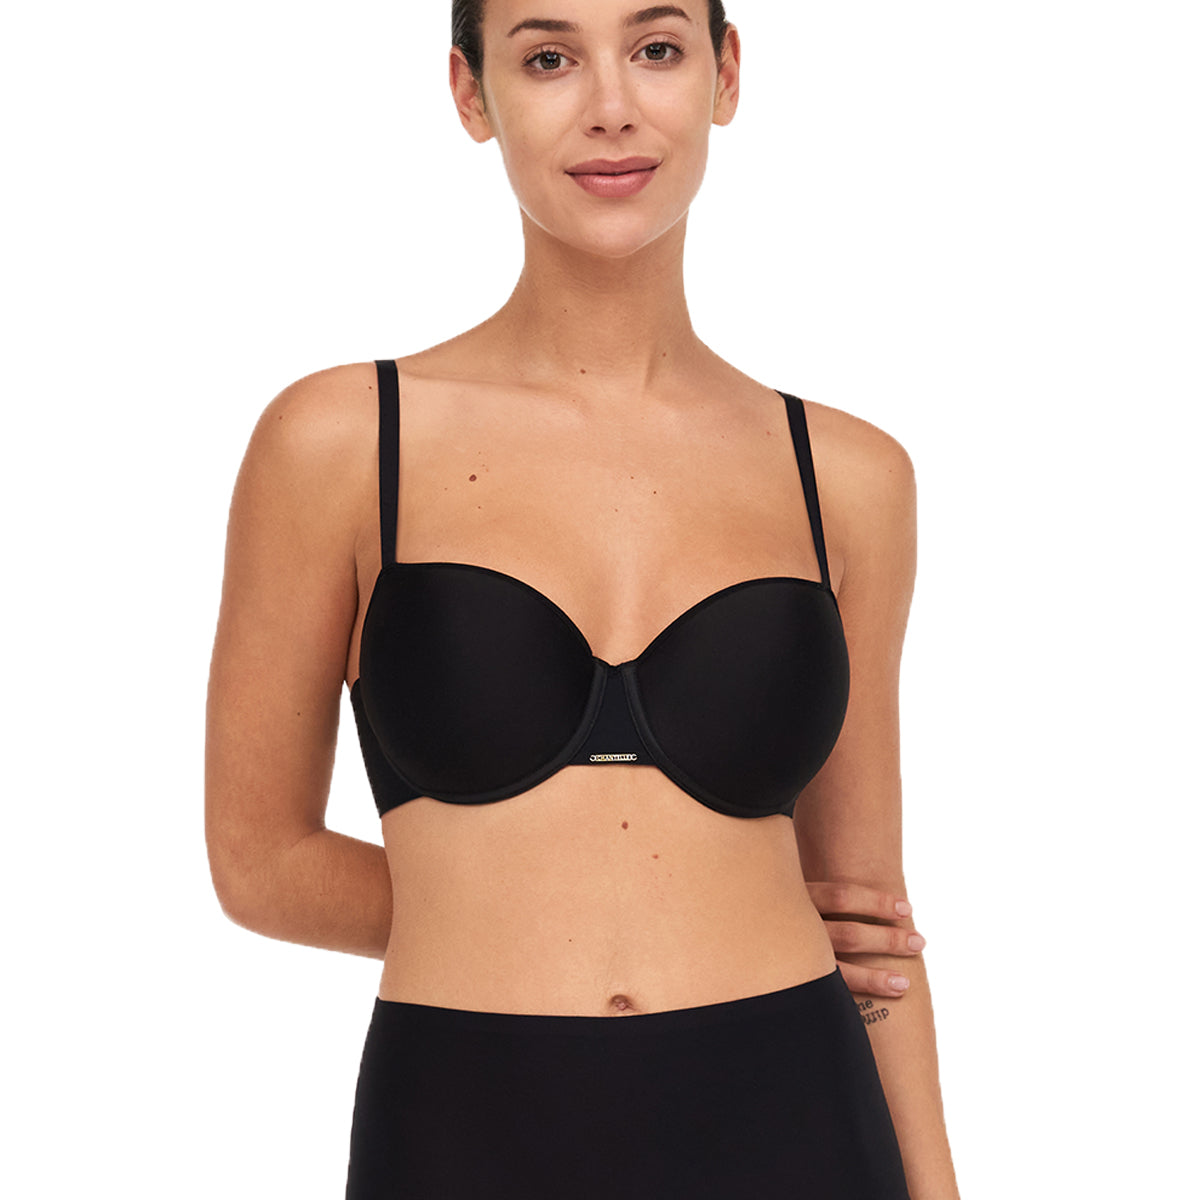 Chantelle Bare Essential Molded Balcony Cup Bra